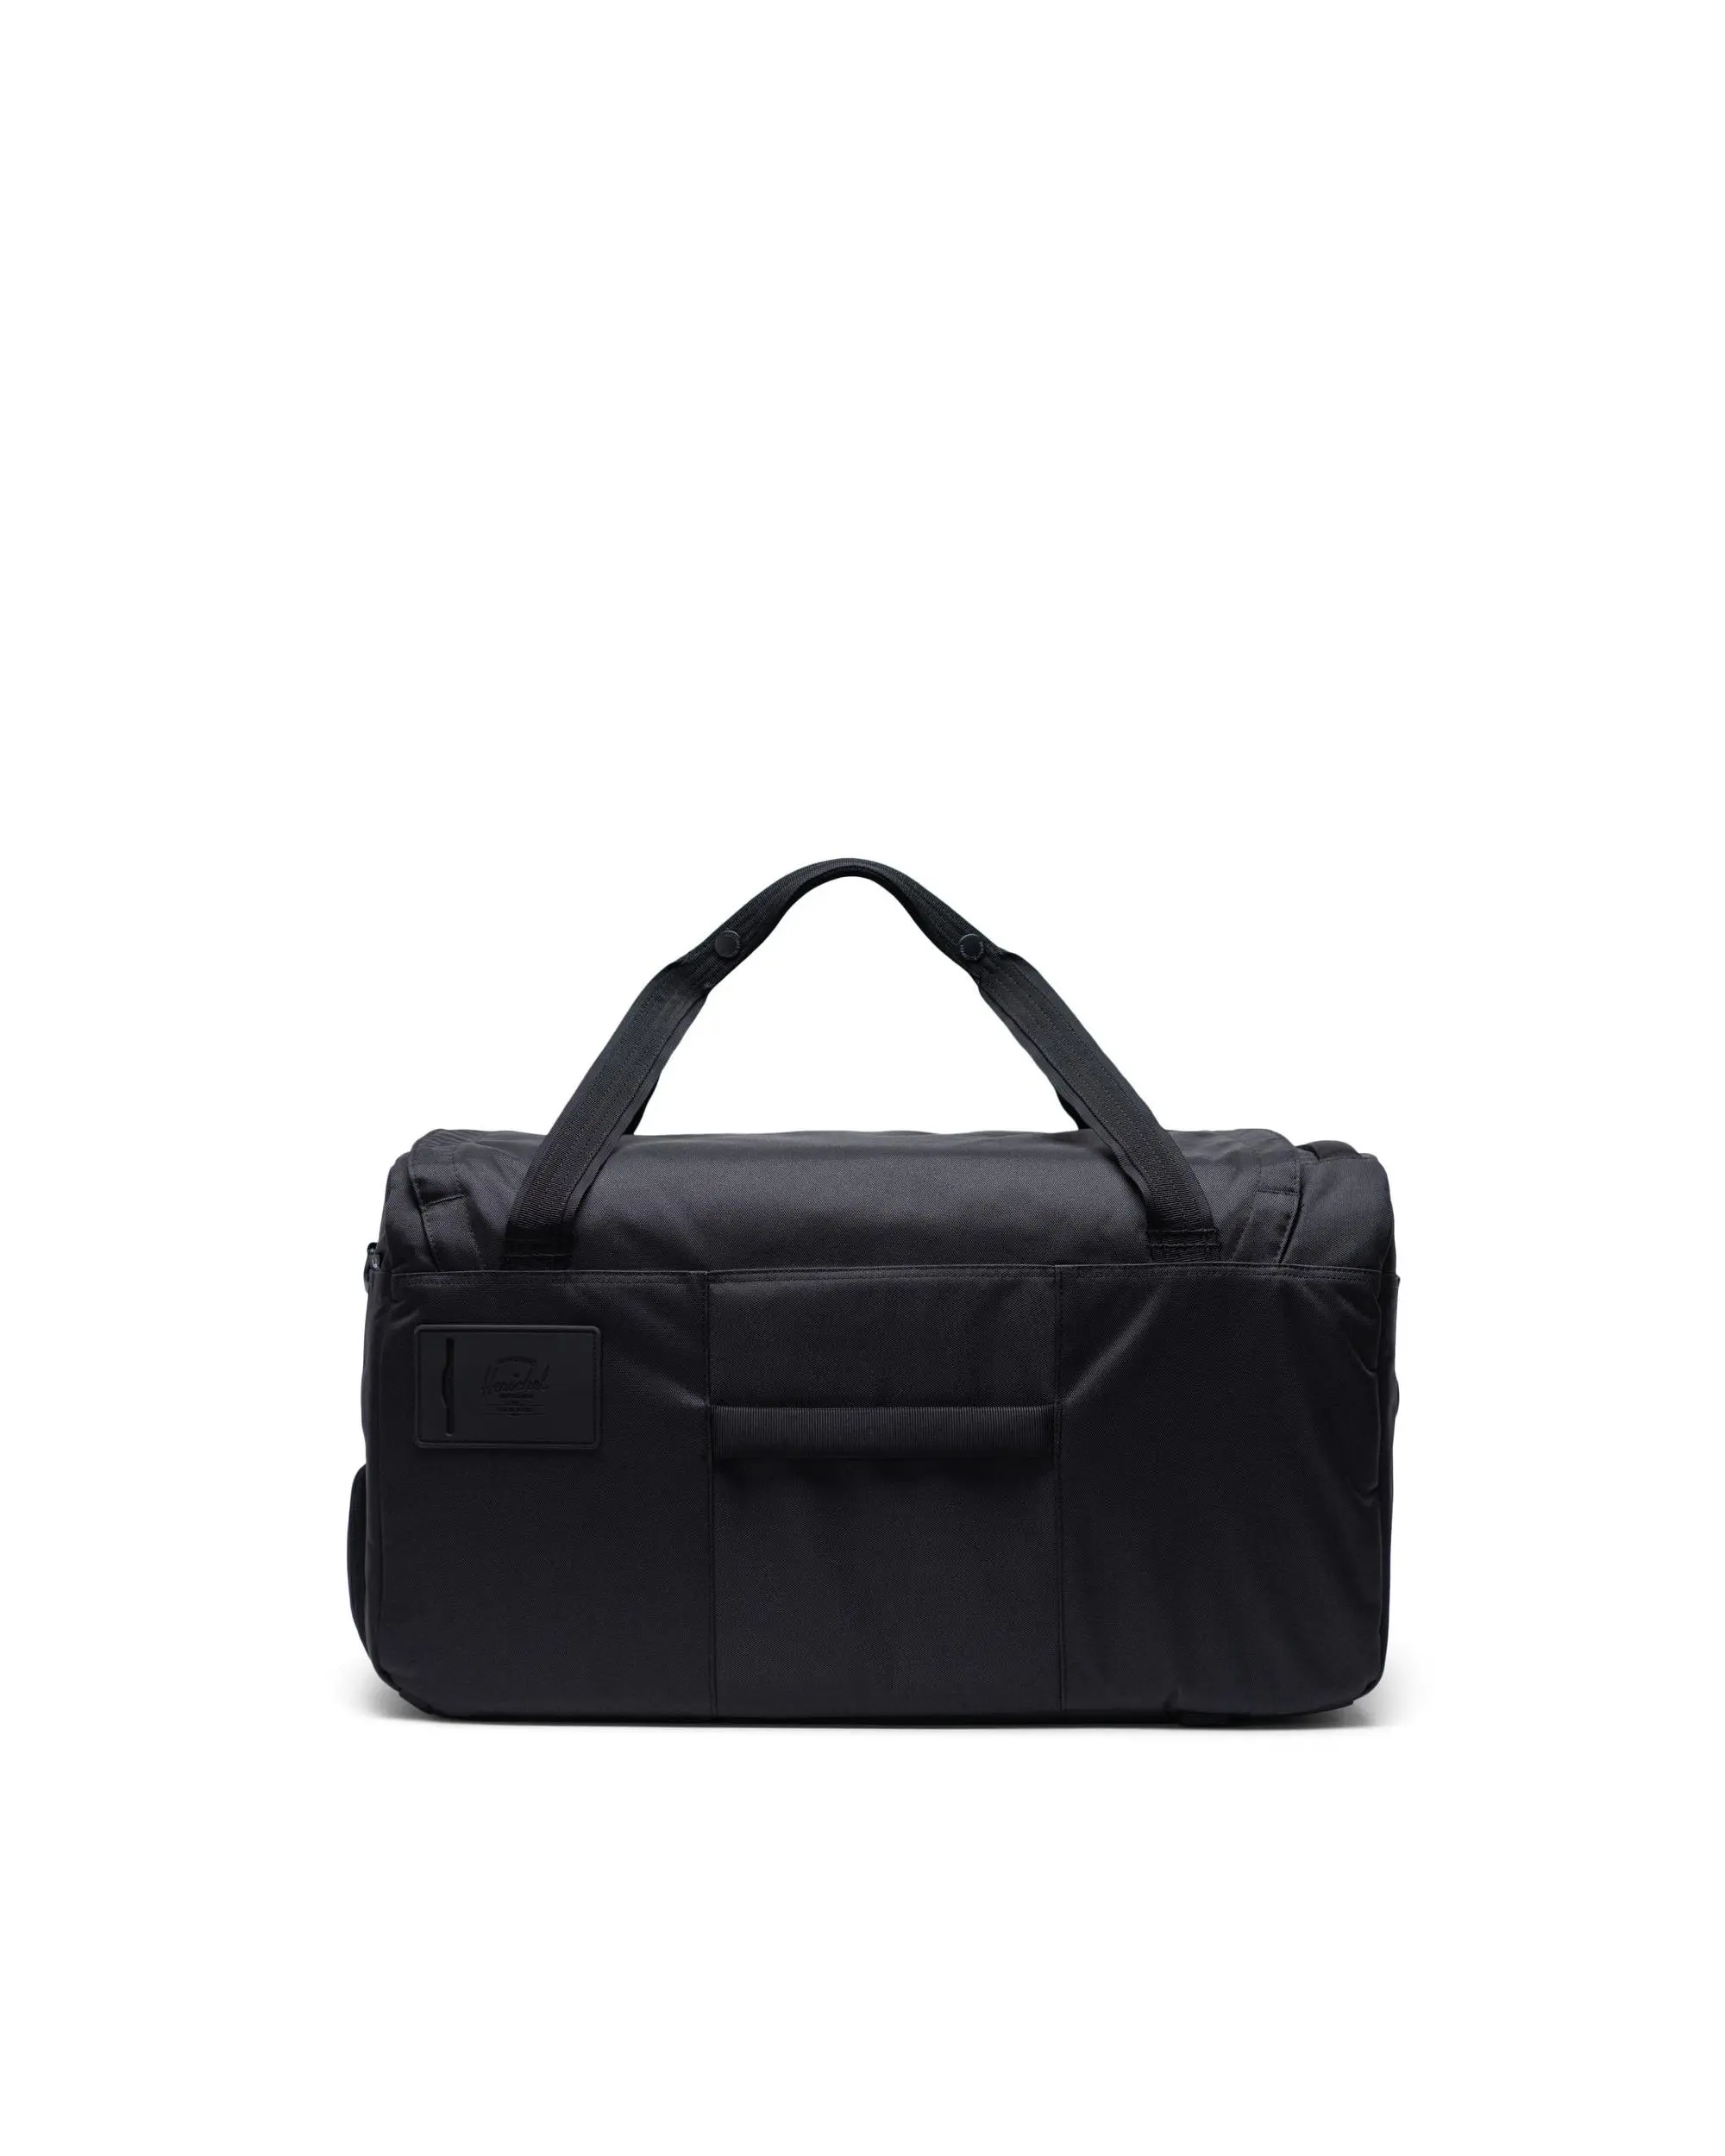 Outfitter 50L Duffle  Herschel Supply Company